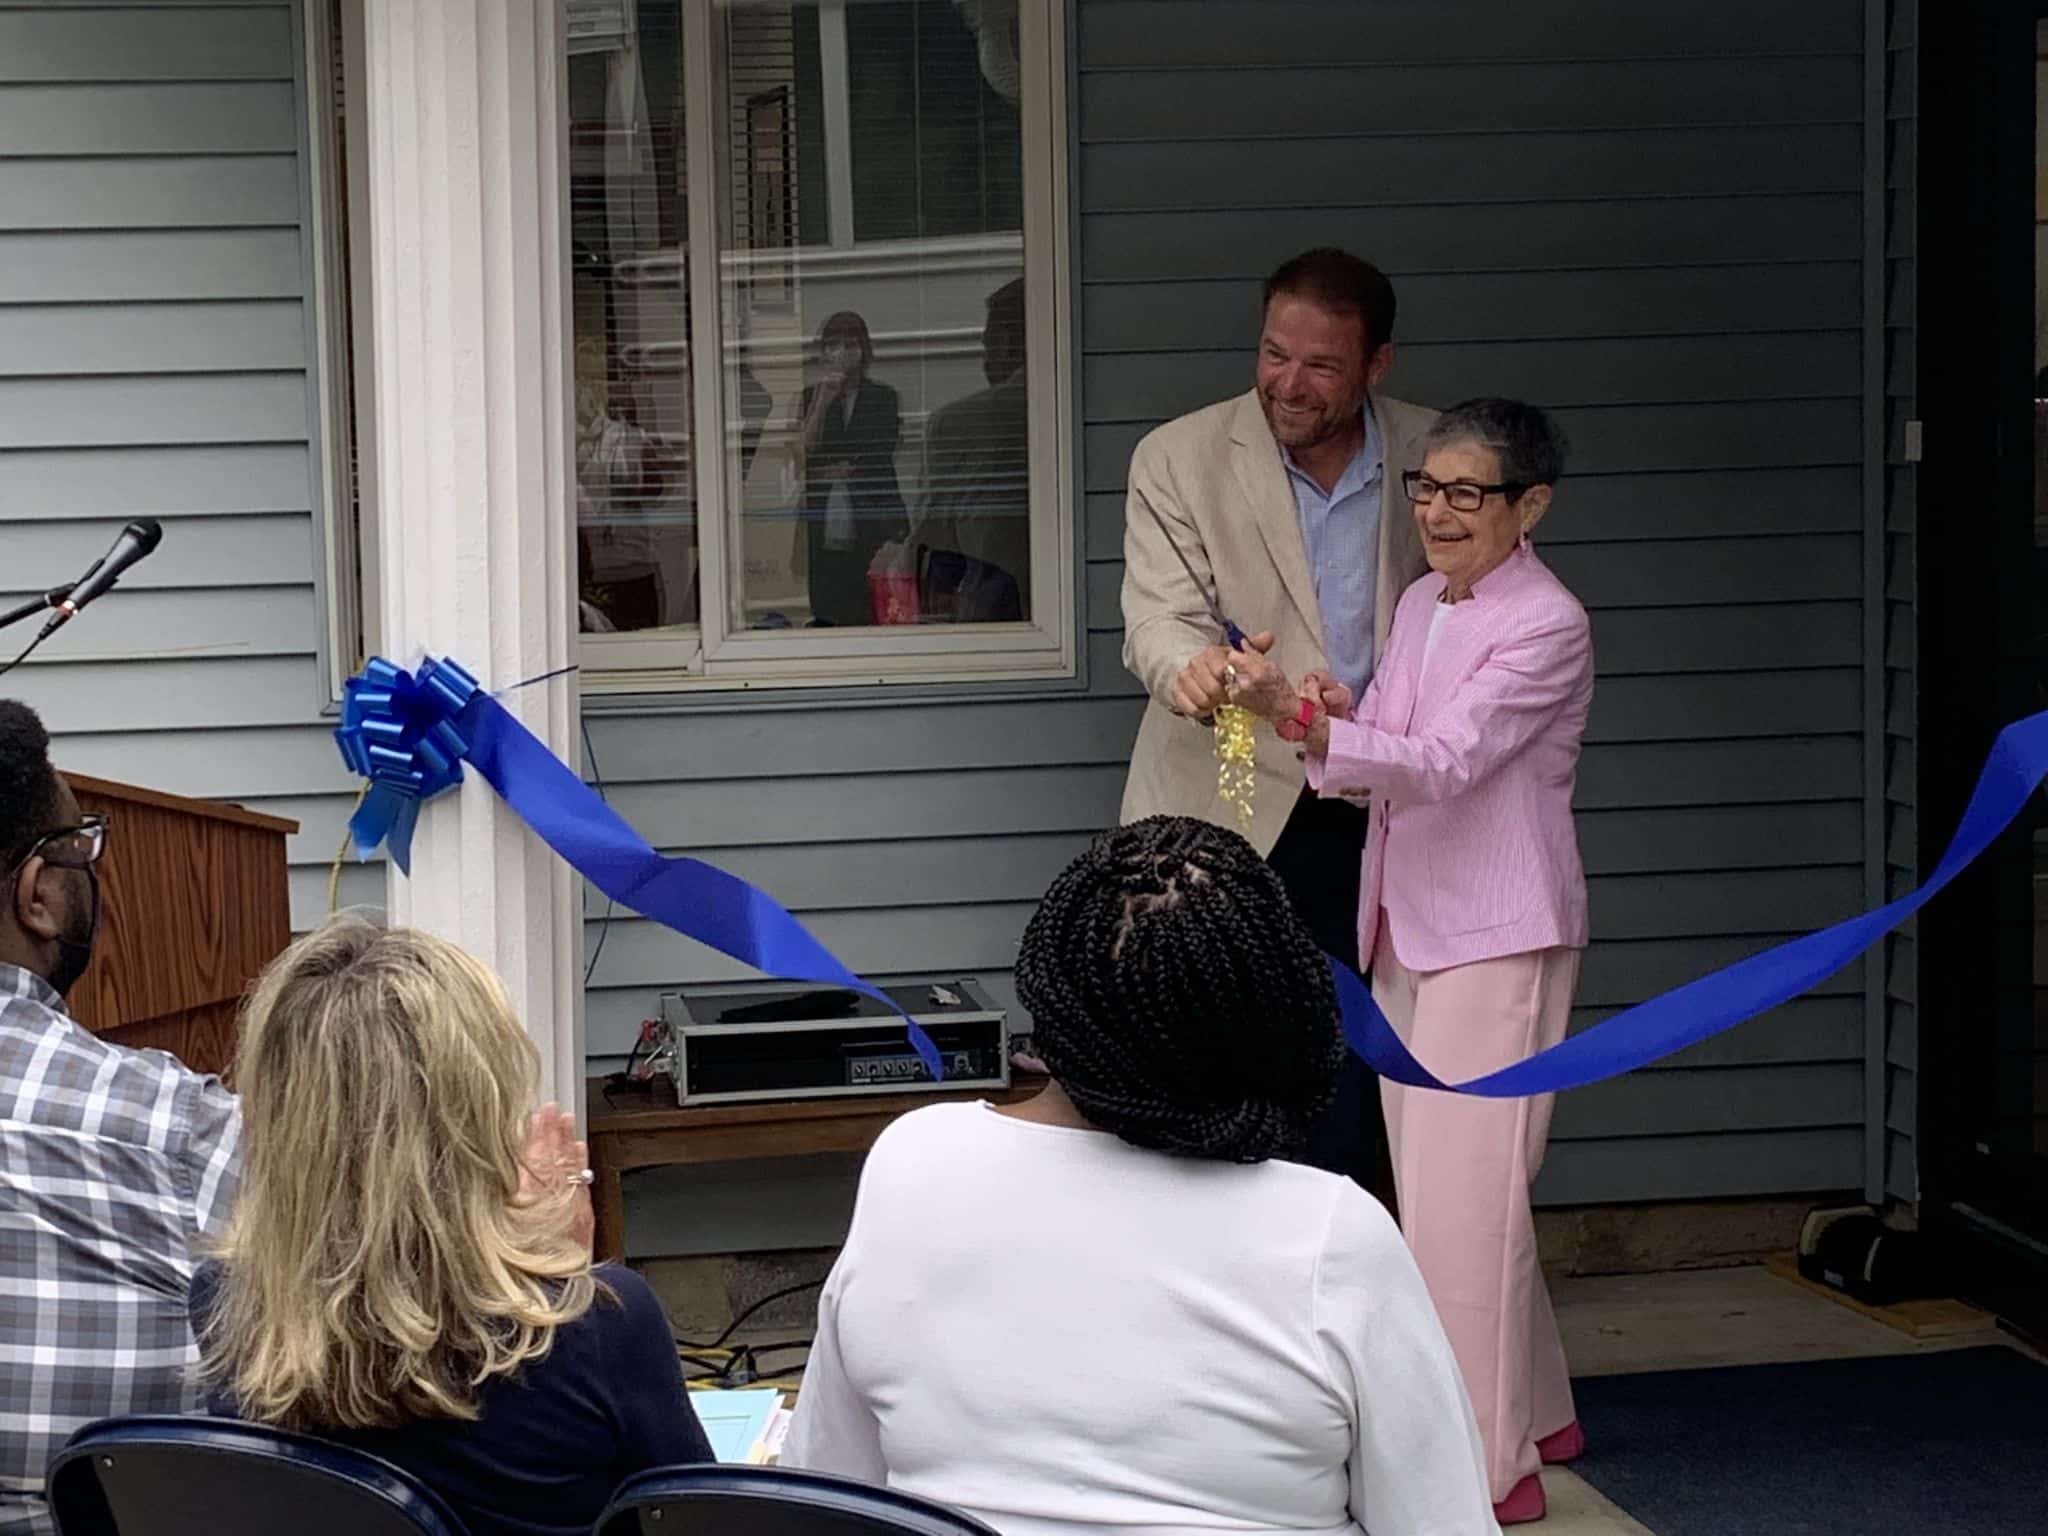 Dr. Jacobs cuts the ribbon